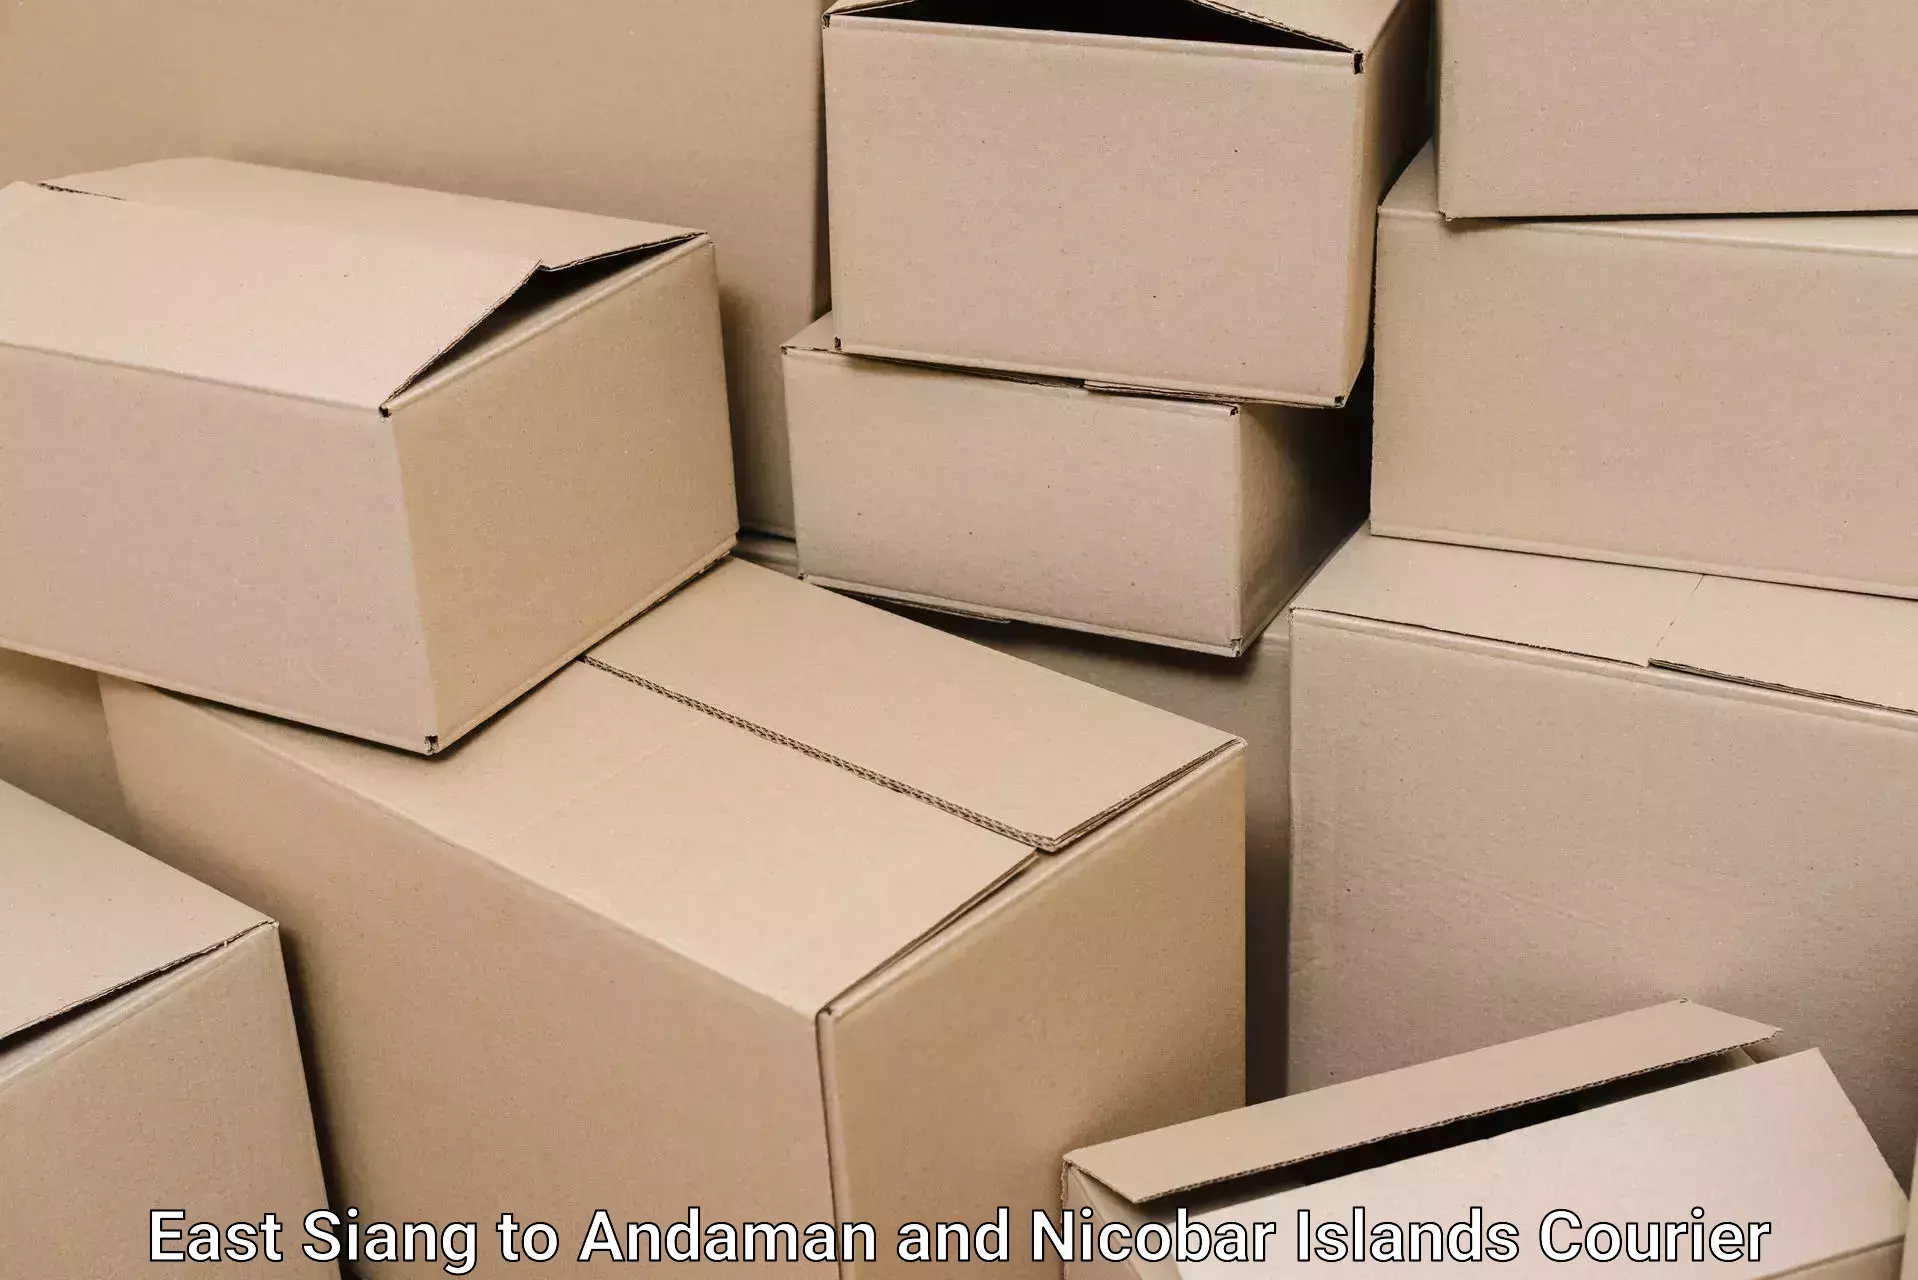 Residential moving experts East Siang to Andaman and Nicobar Islands